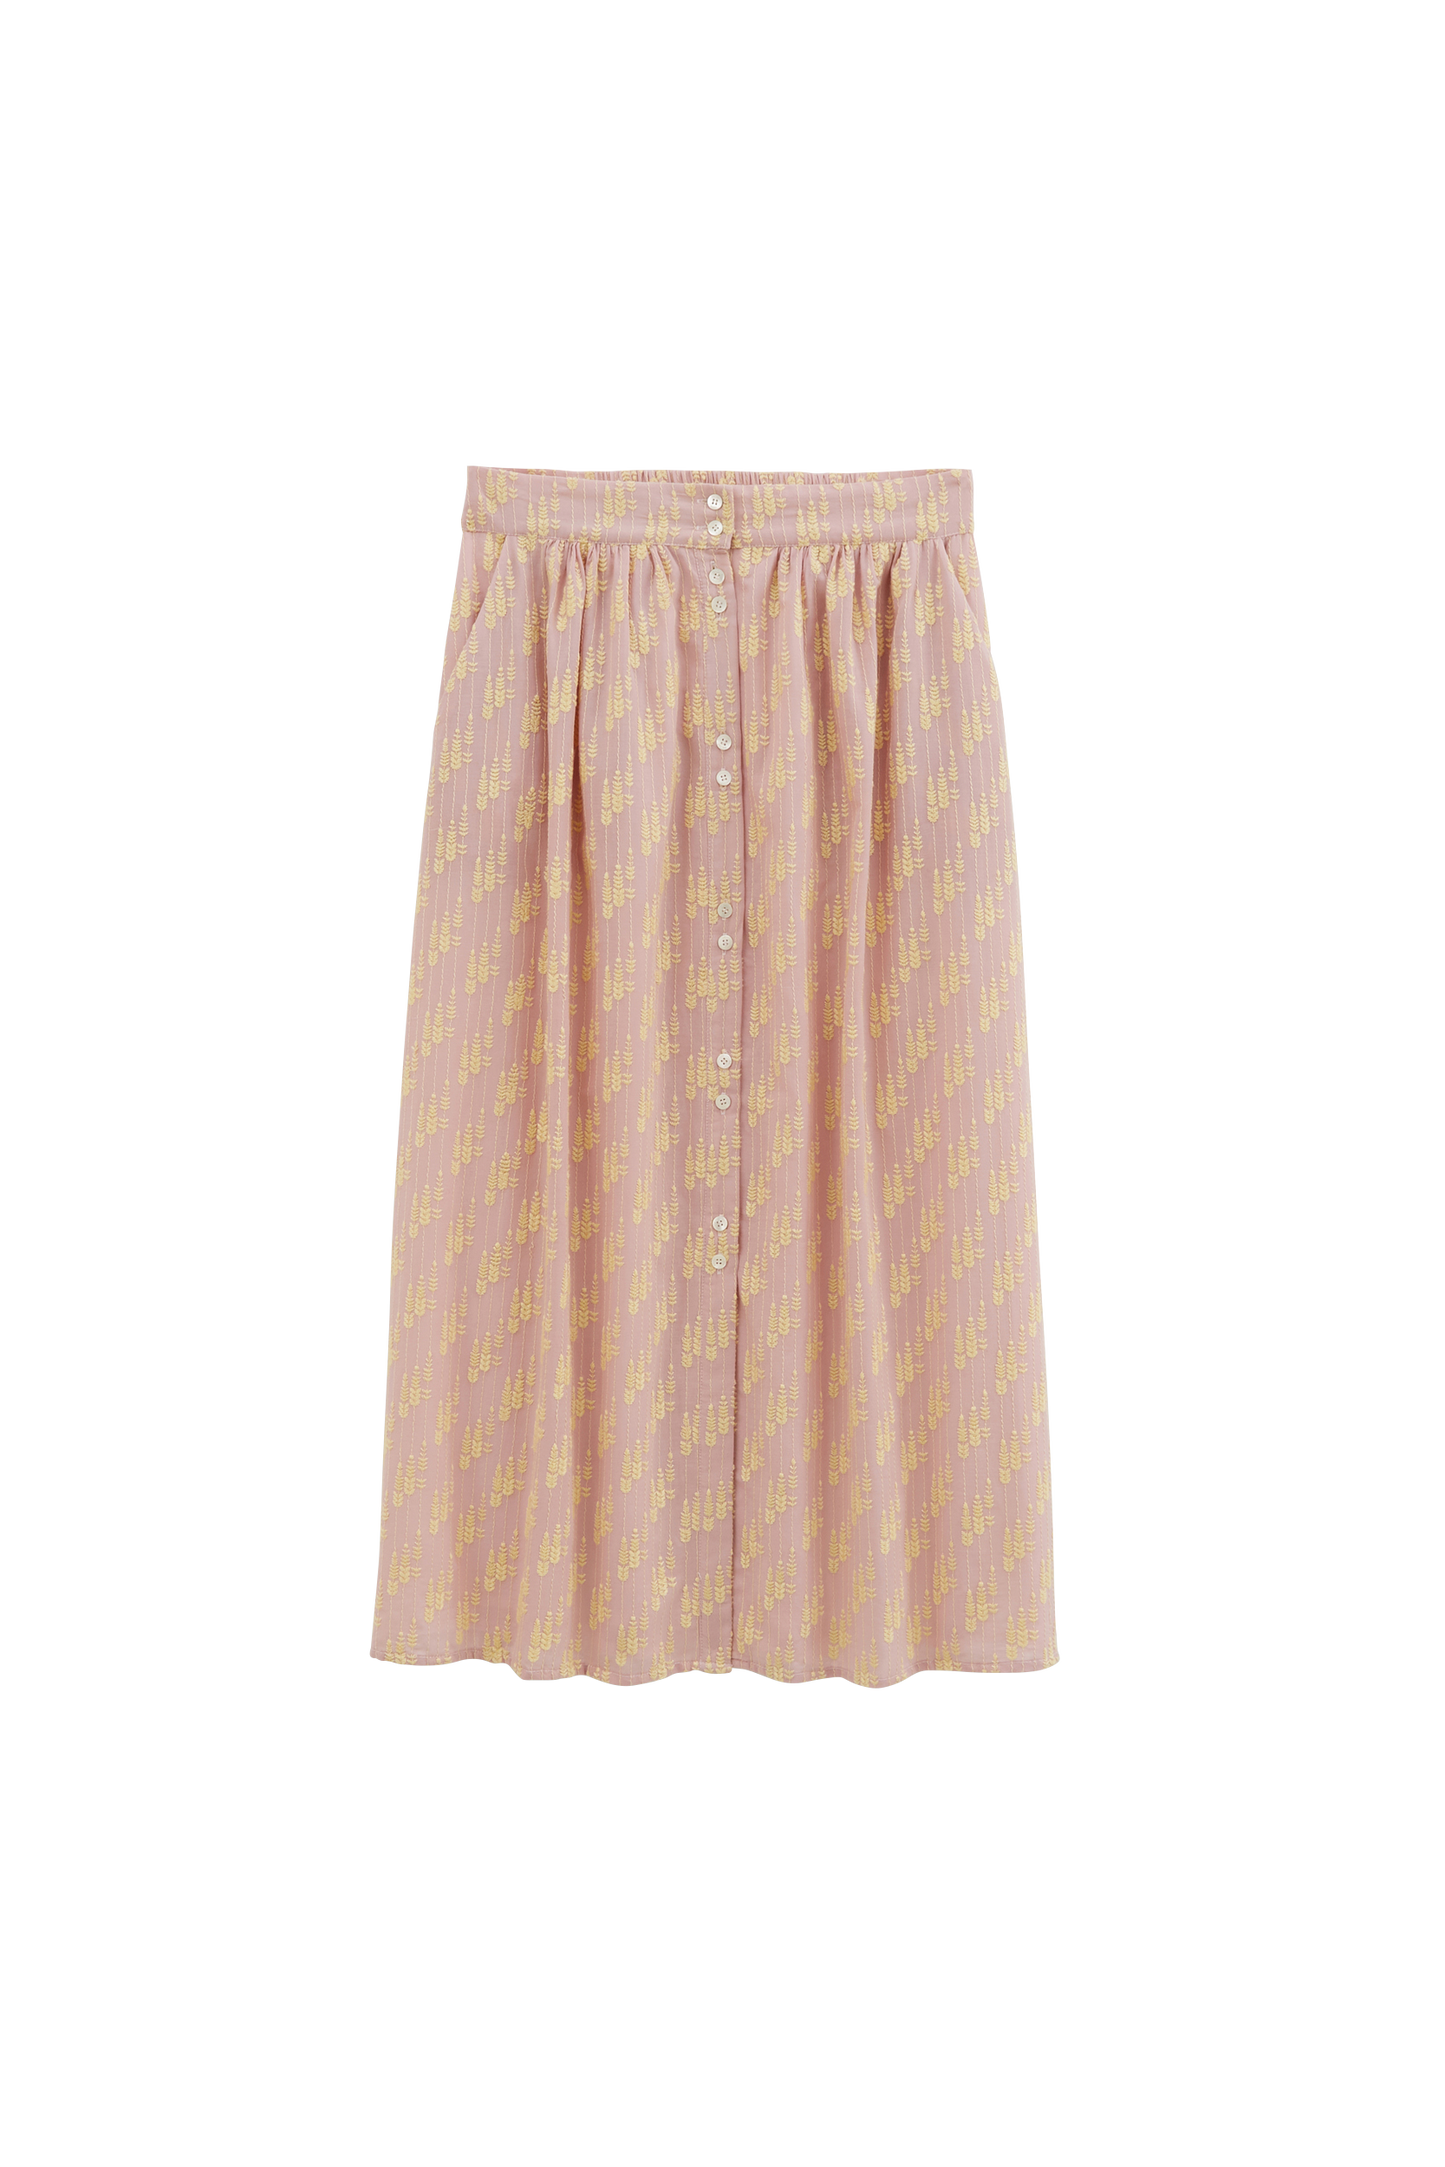 Sally skirt with pink and yellow embroidery